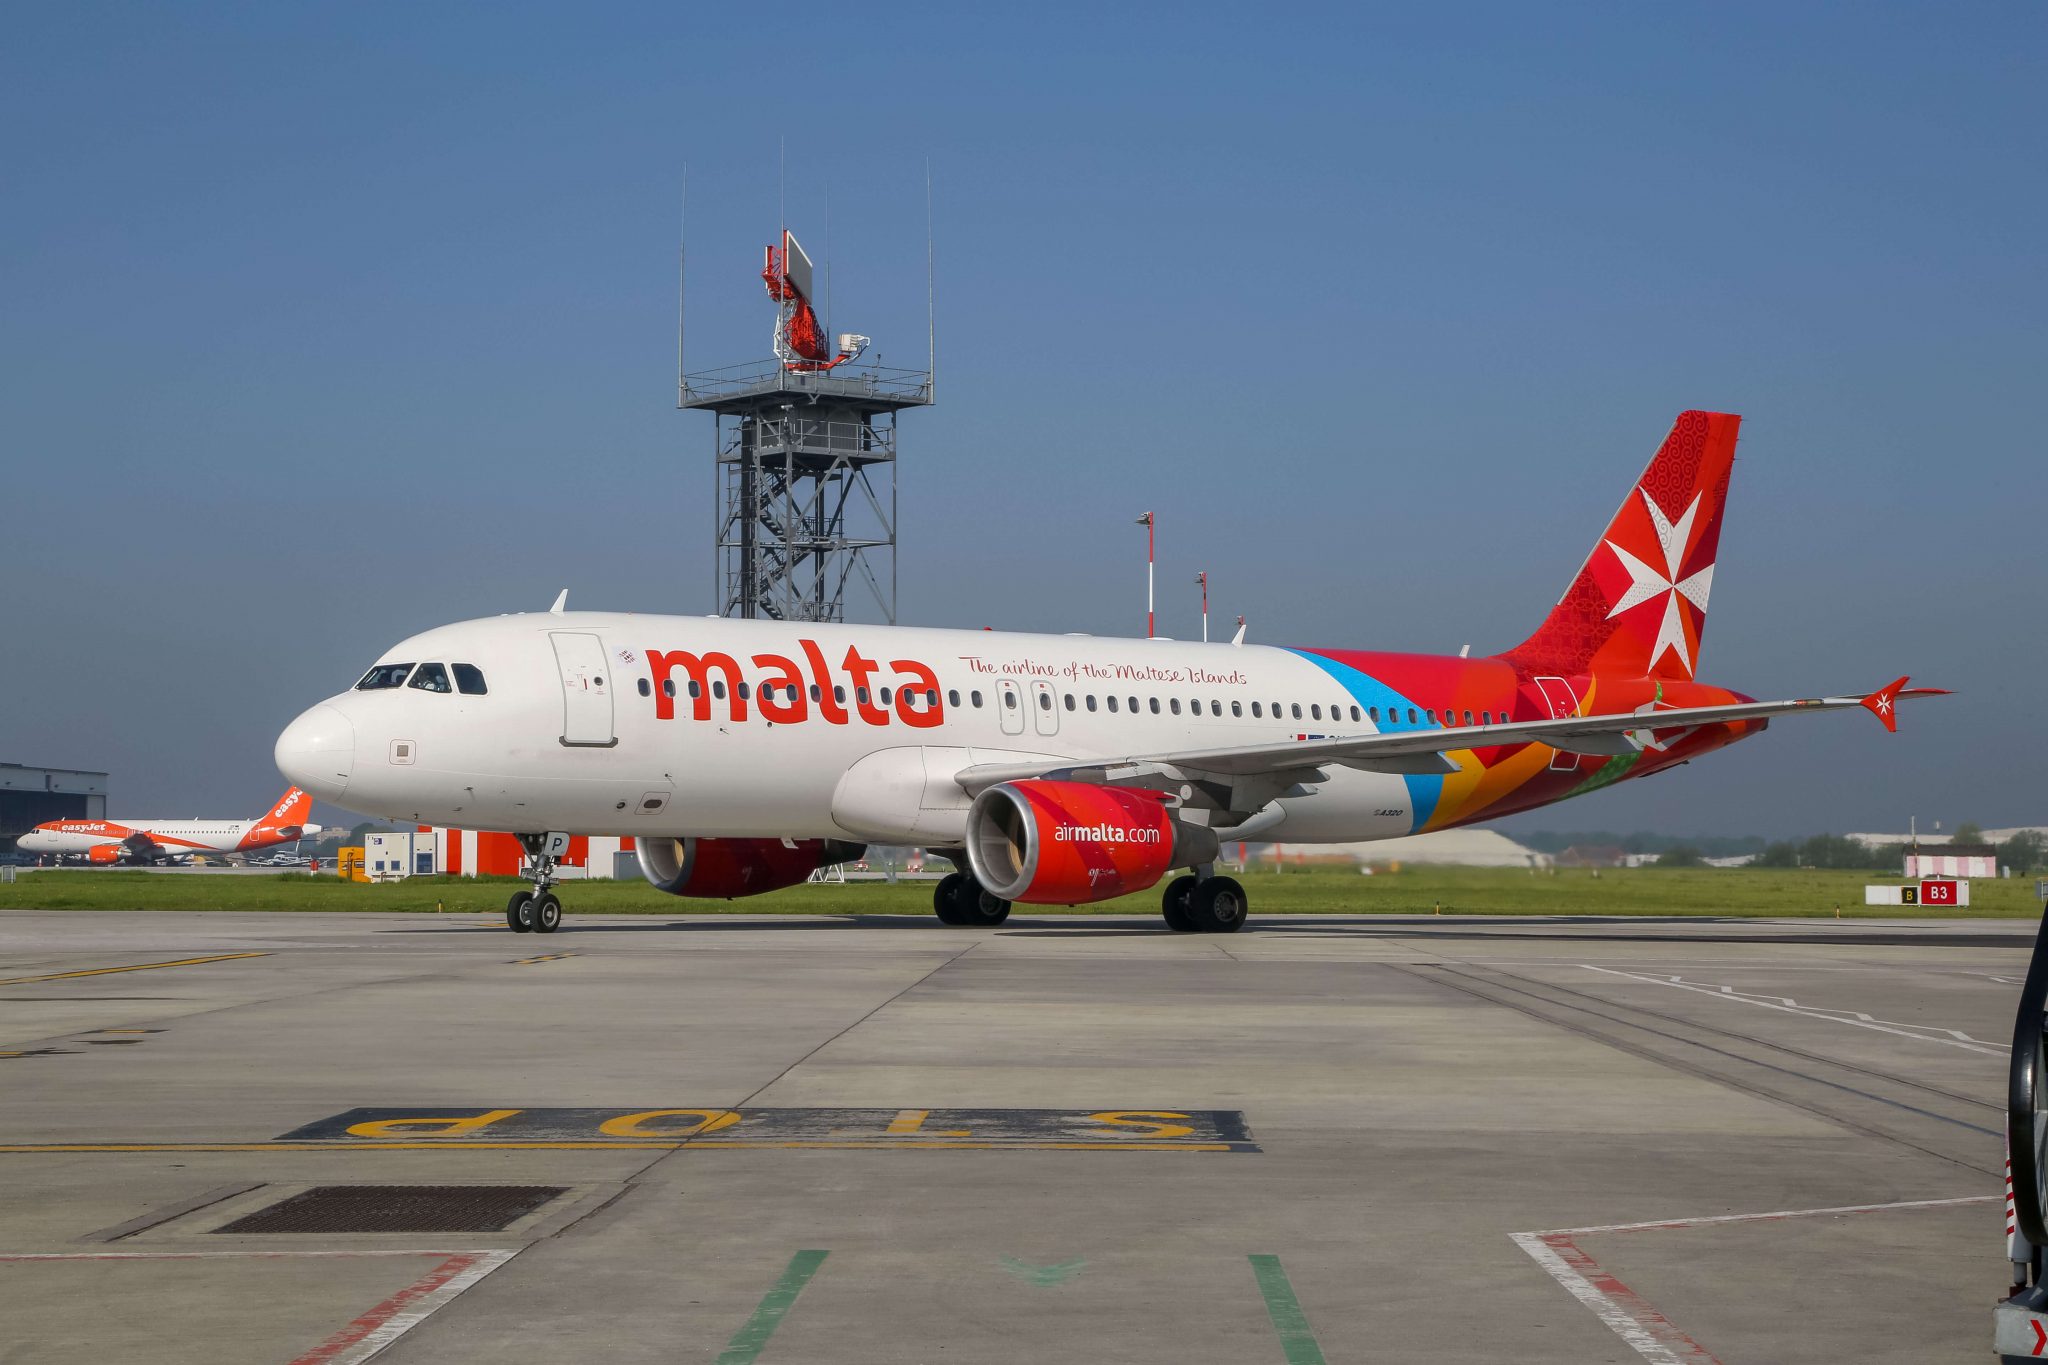 Air Malta is currently using only three of its 10 aircraft, passenger bookings at 63%